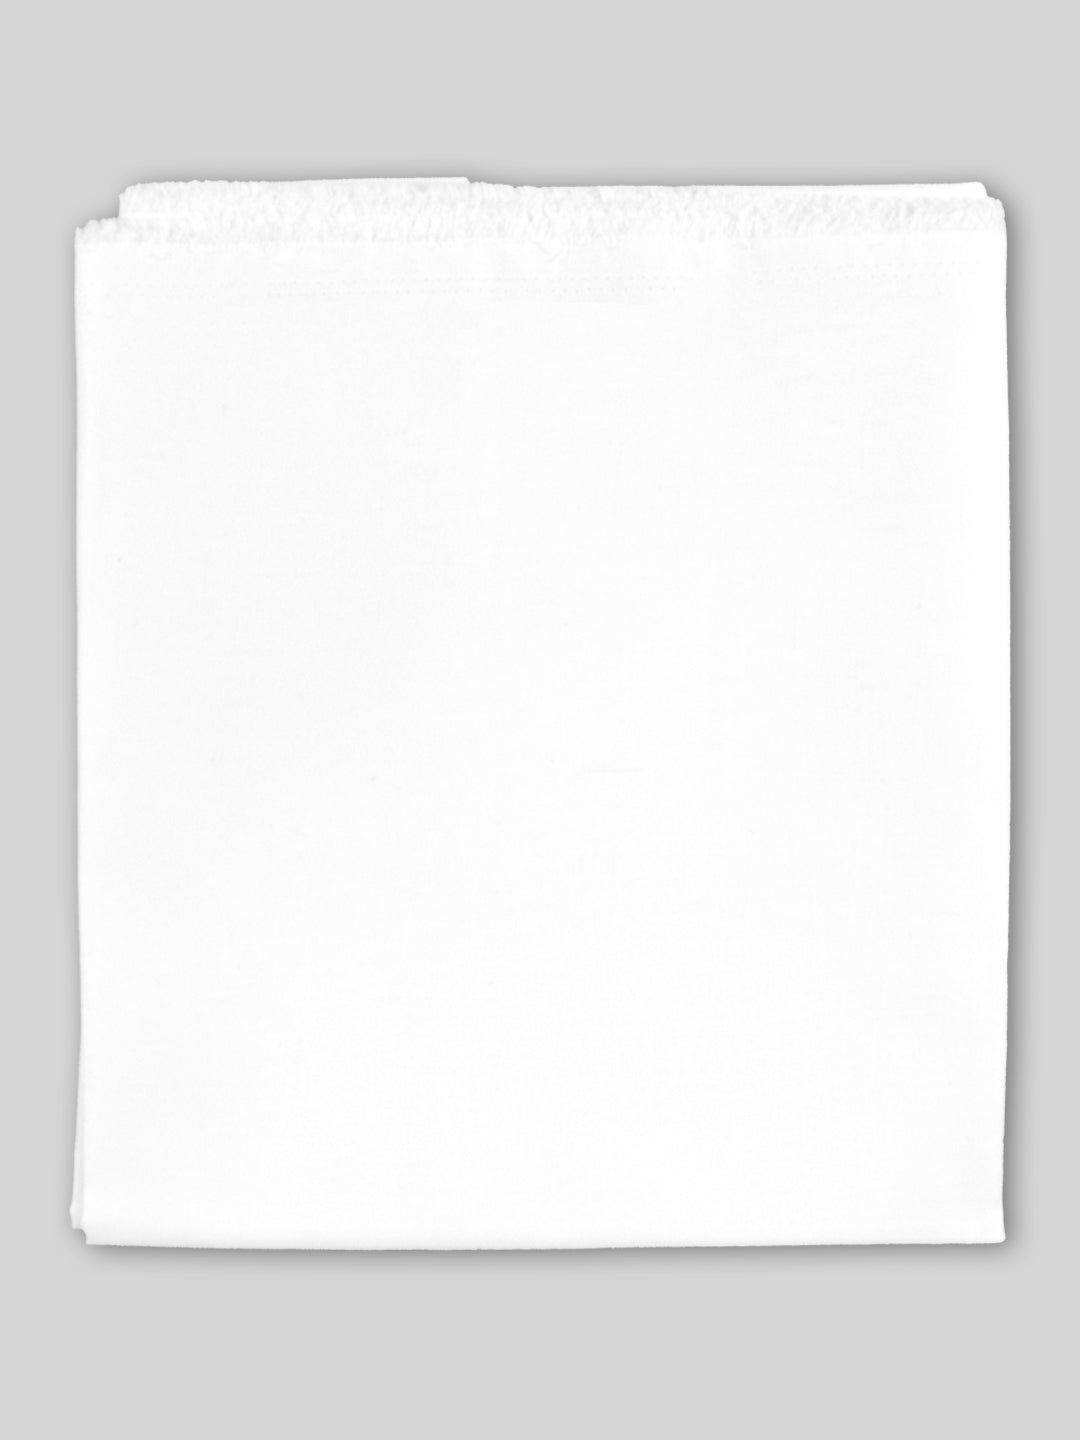 Cotton white shirt Unstitched Fabric-Cordial